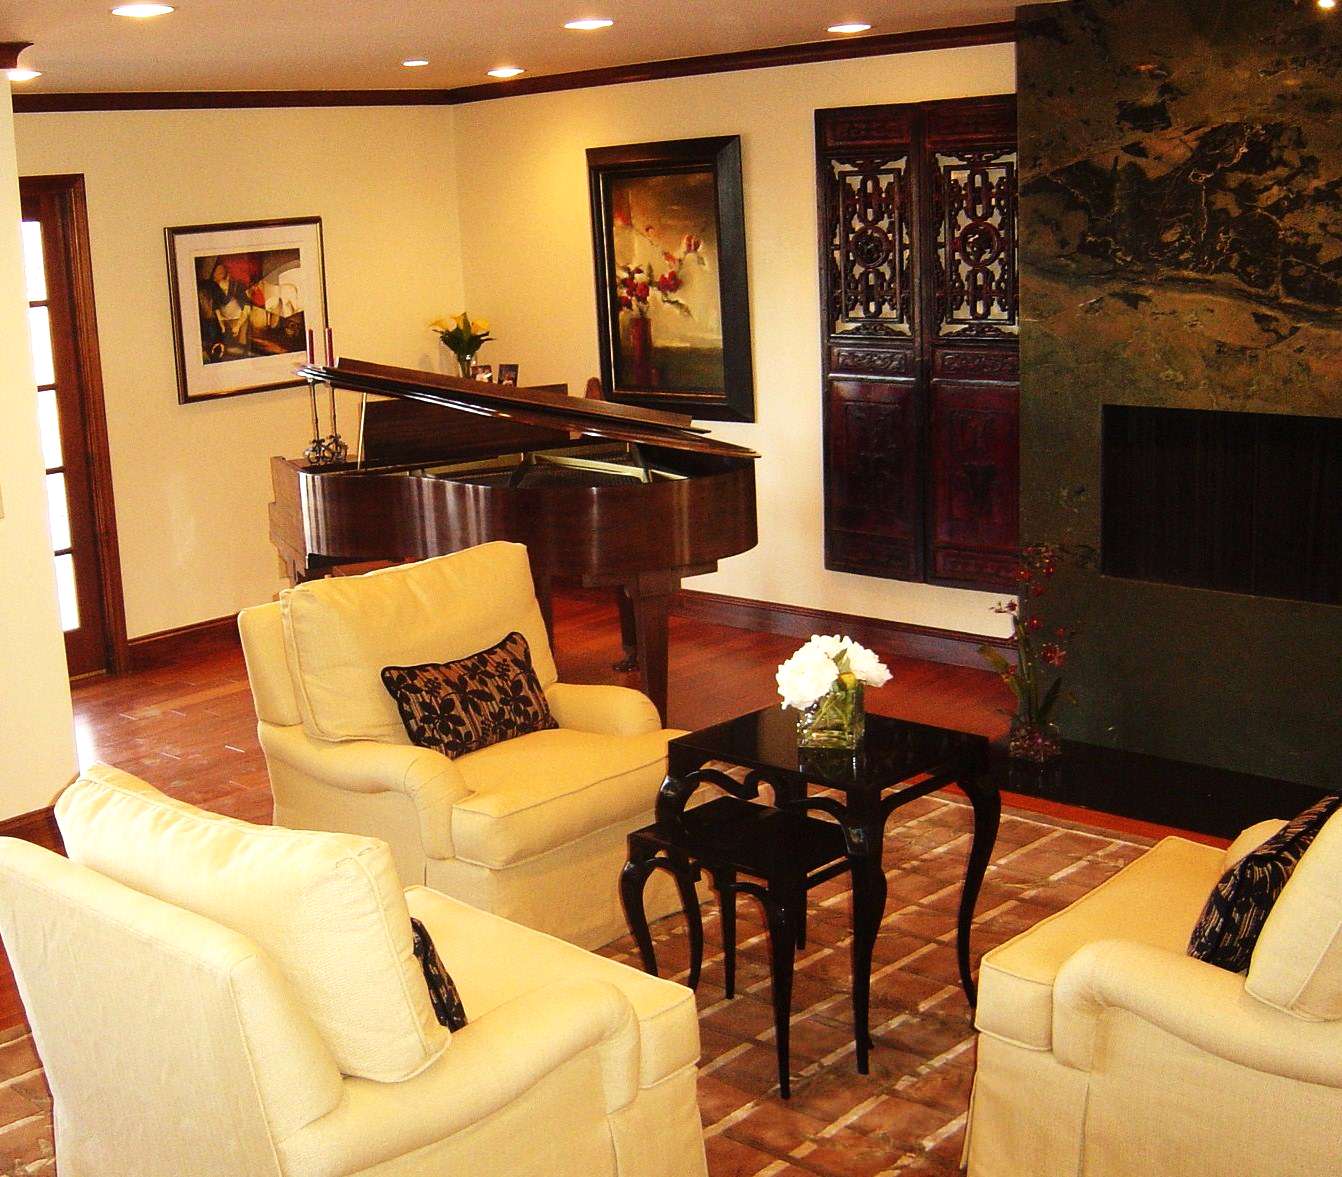 Modern living room with Asian Accents - a third view with Baby Grand piano